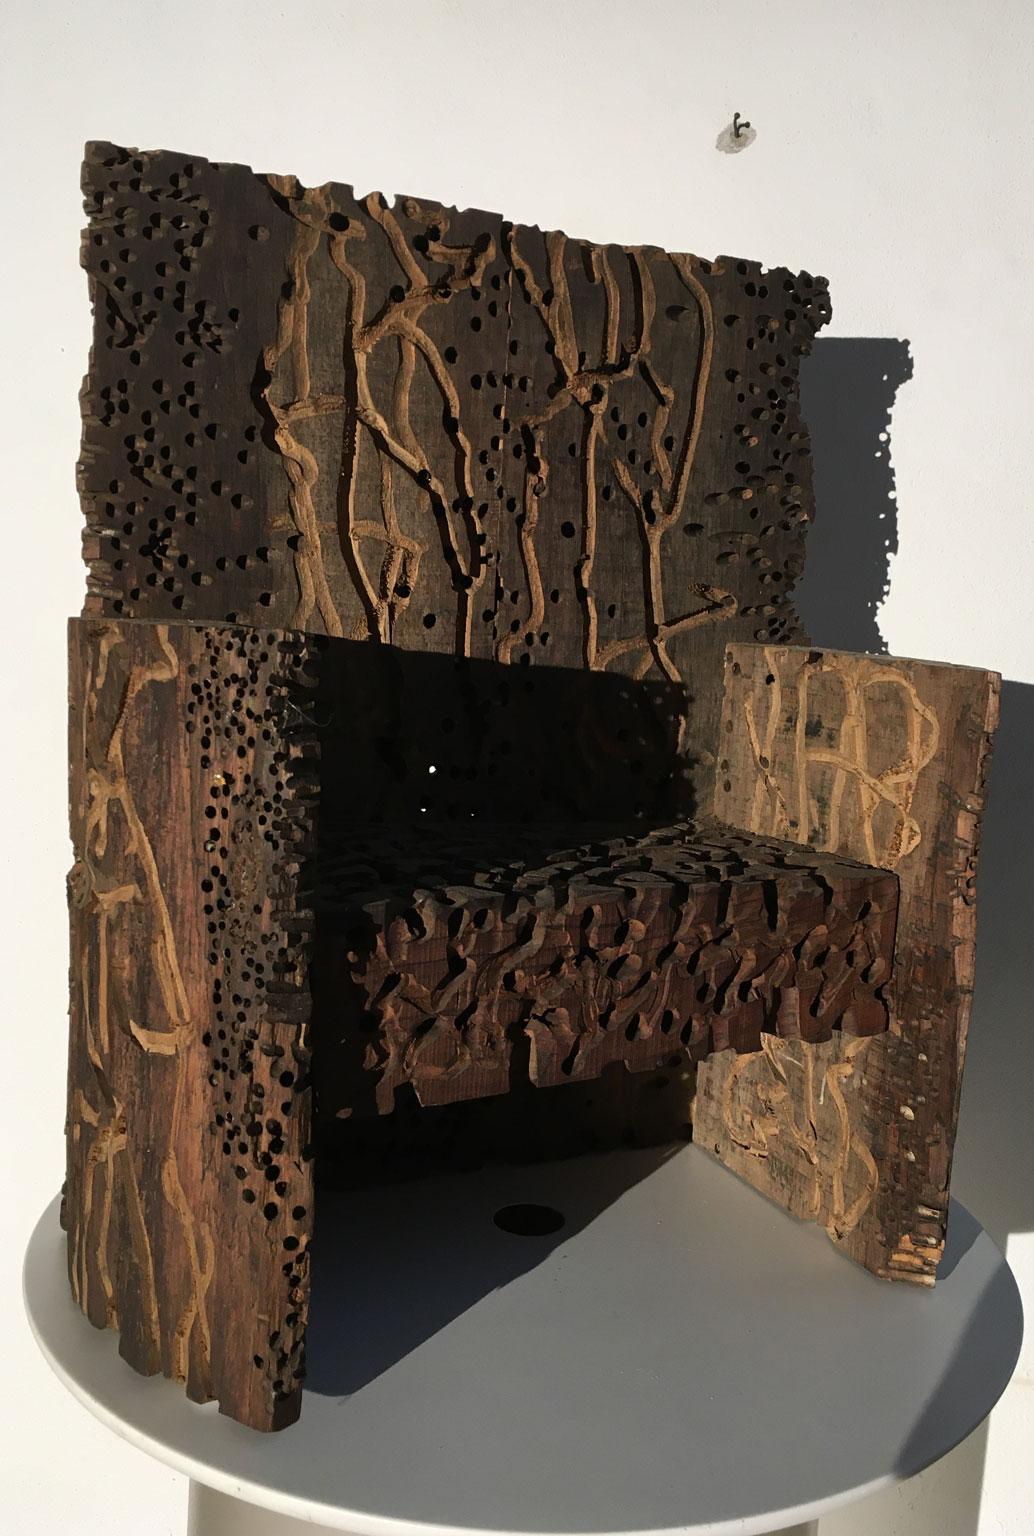 1985 Italy Wooden Abstract Sculpture by Urano Palma Grande Trono Big Throne For Sale 3